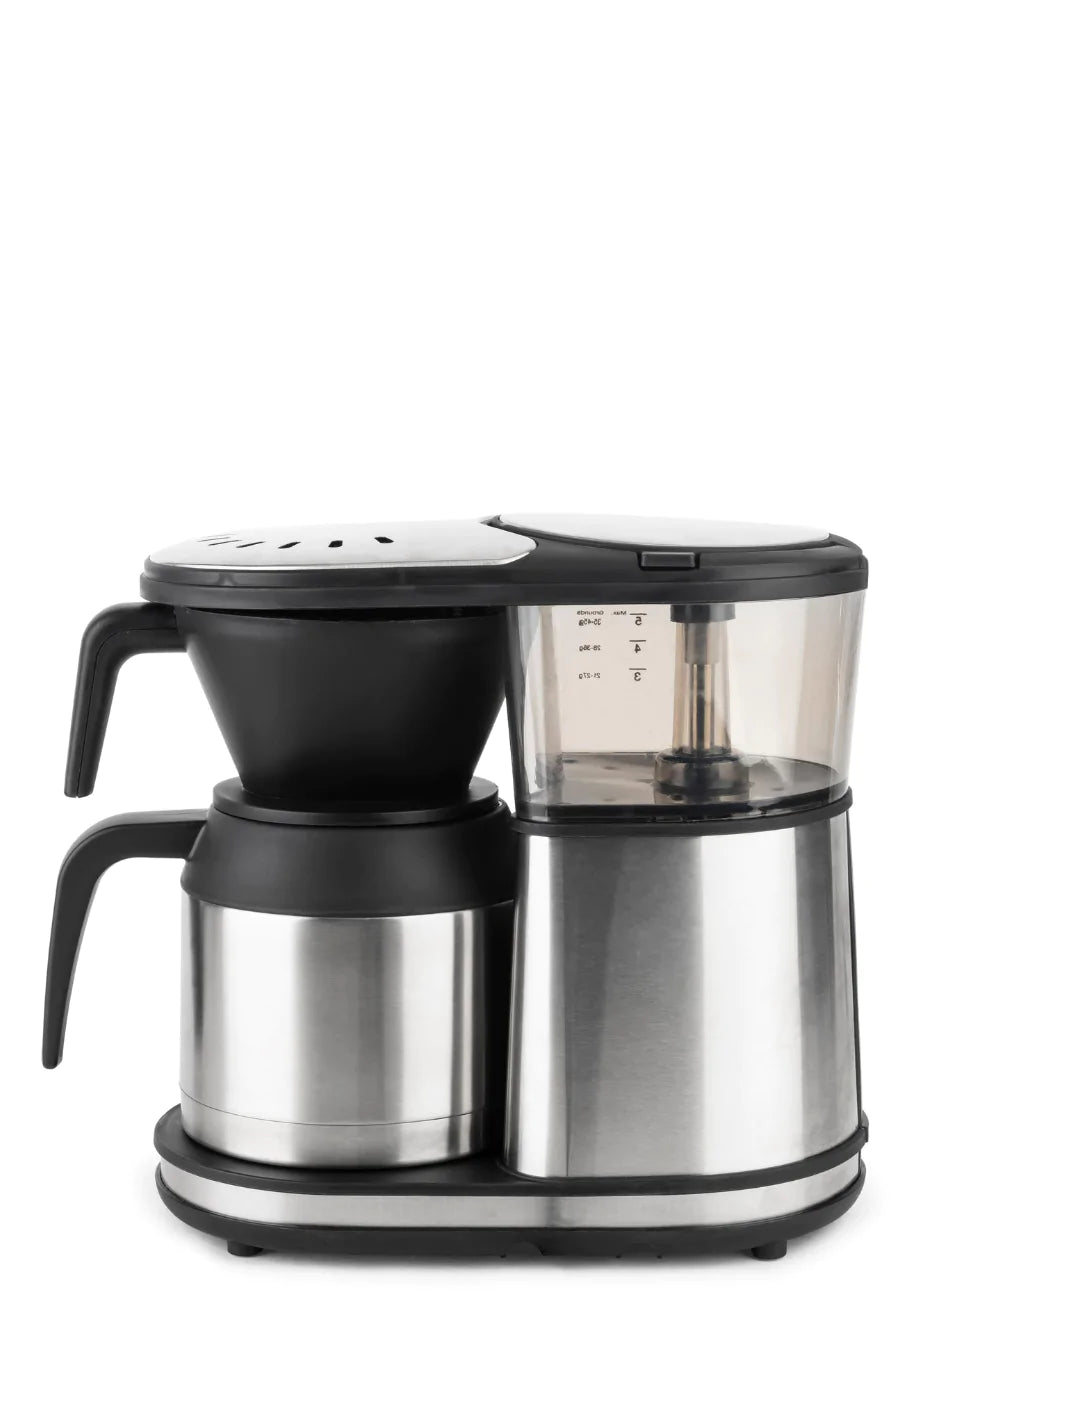 Bonavita One-Touch Thermal Carafe Coffee Brewer (5-Cup) - Image 5